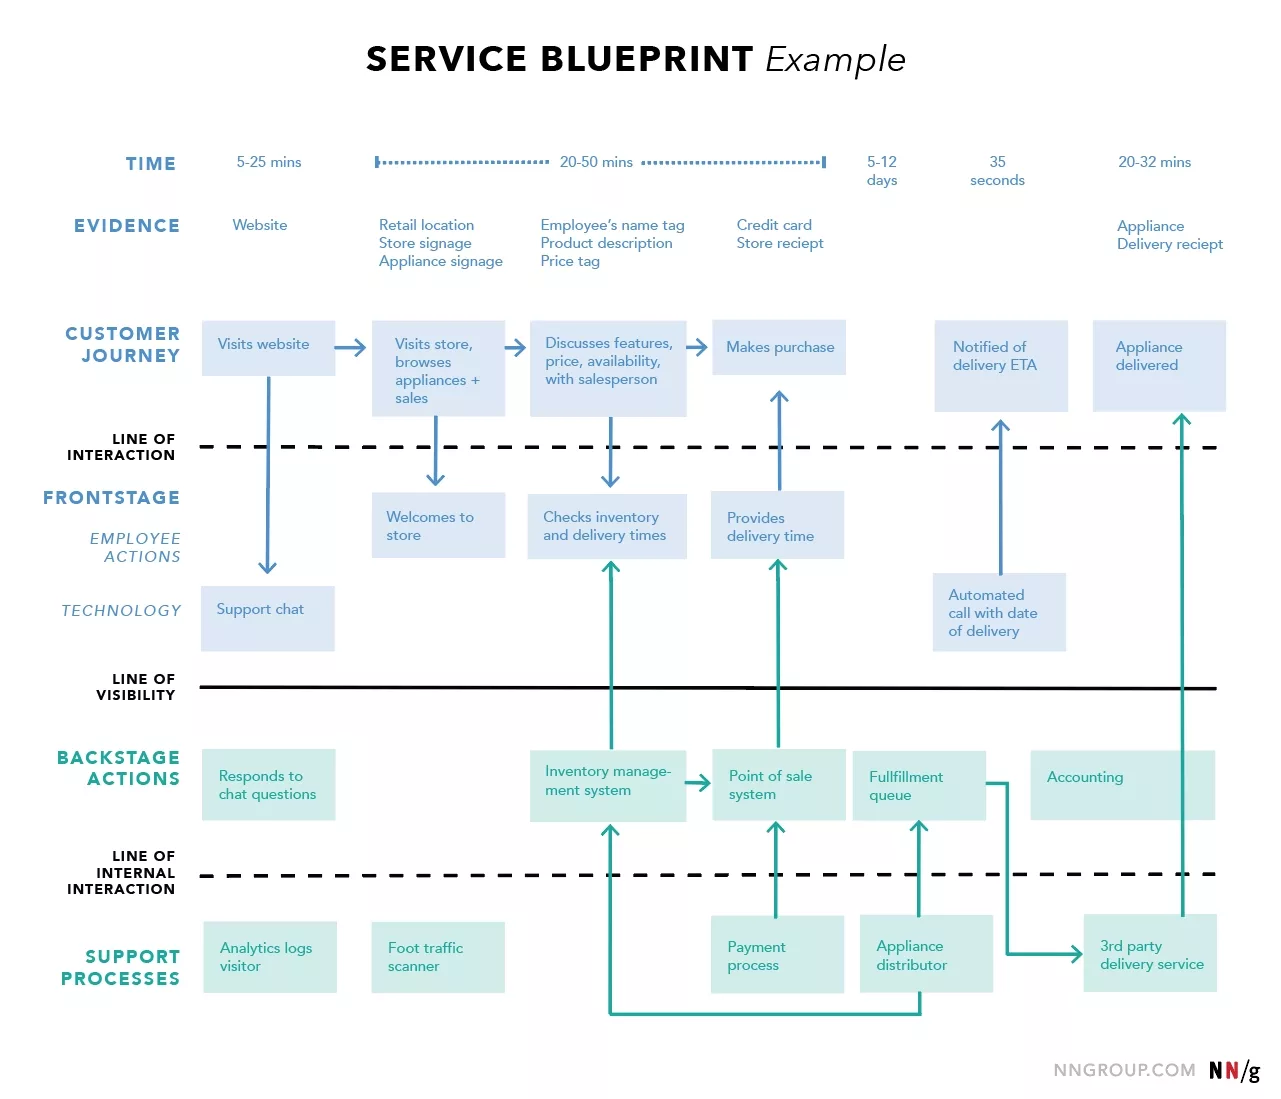 An example service blueprint from the Nielsen Norman group.